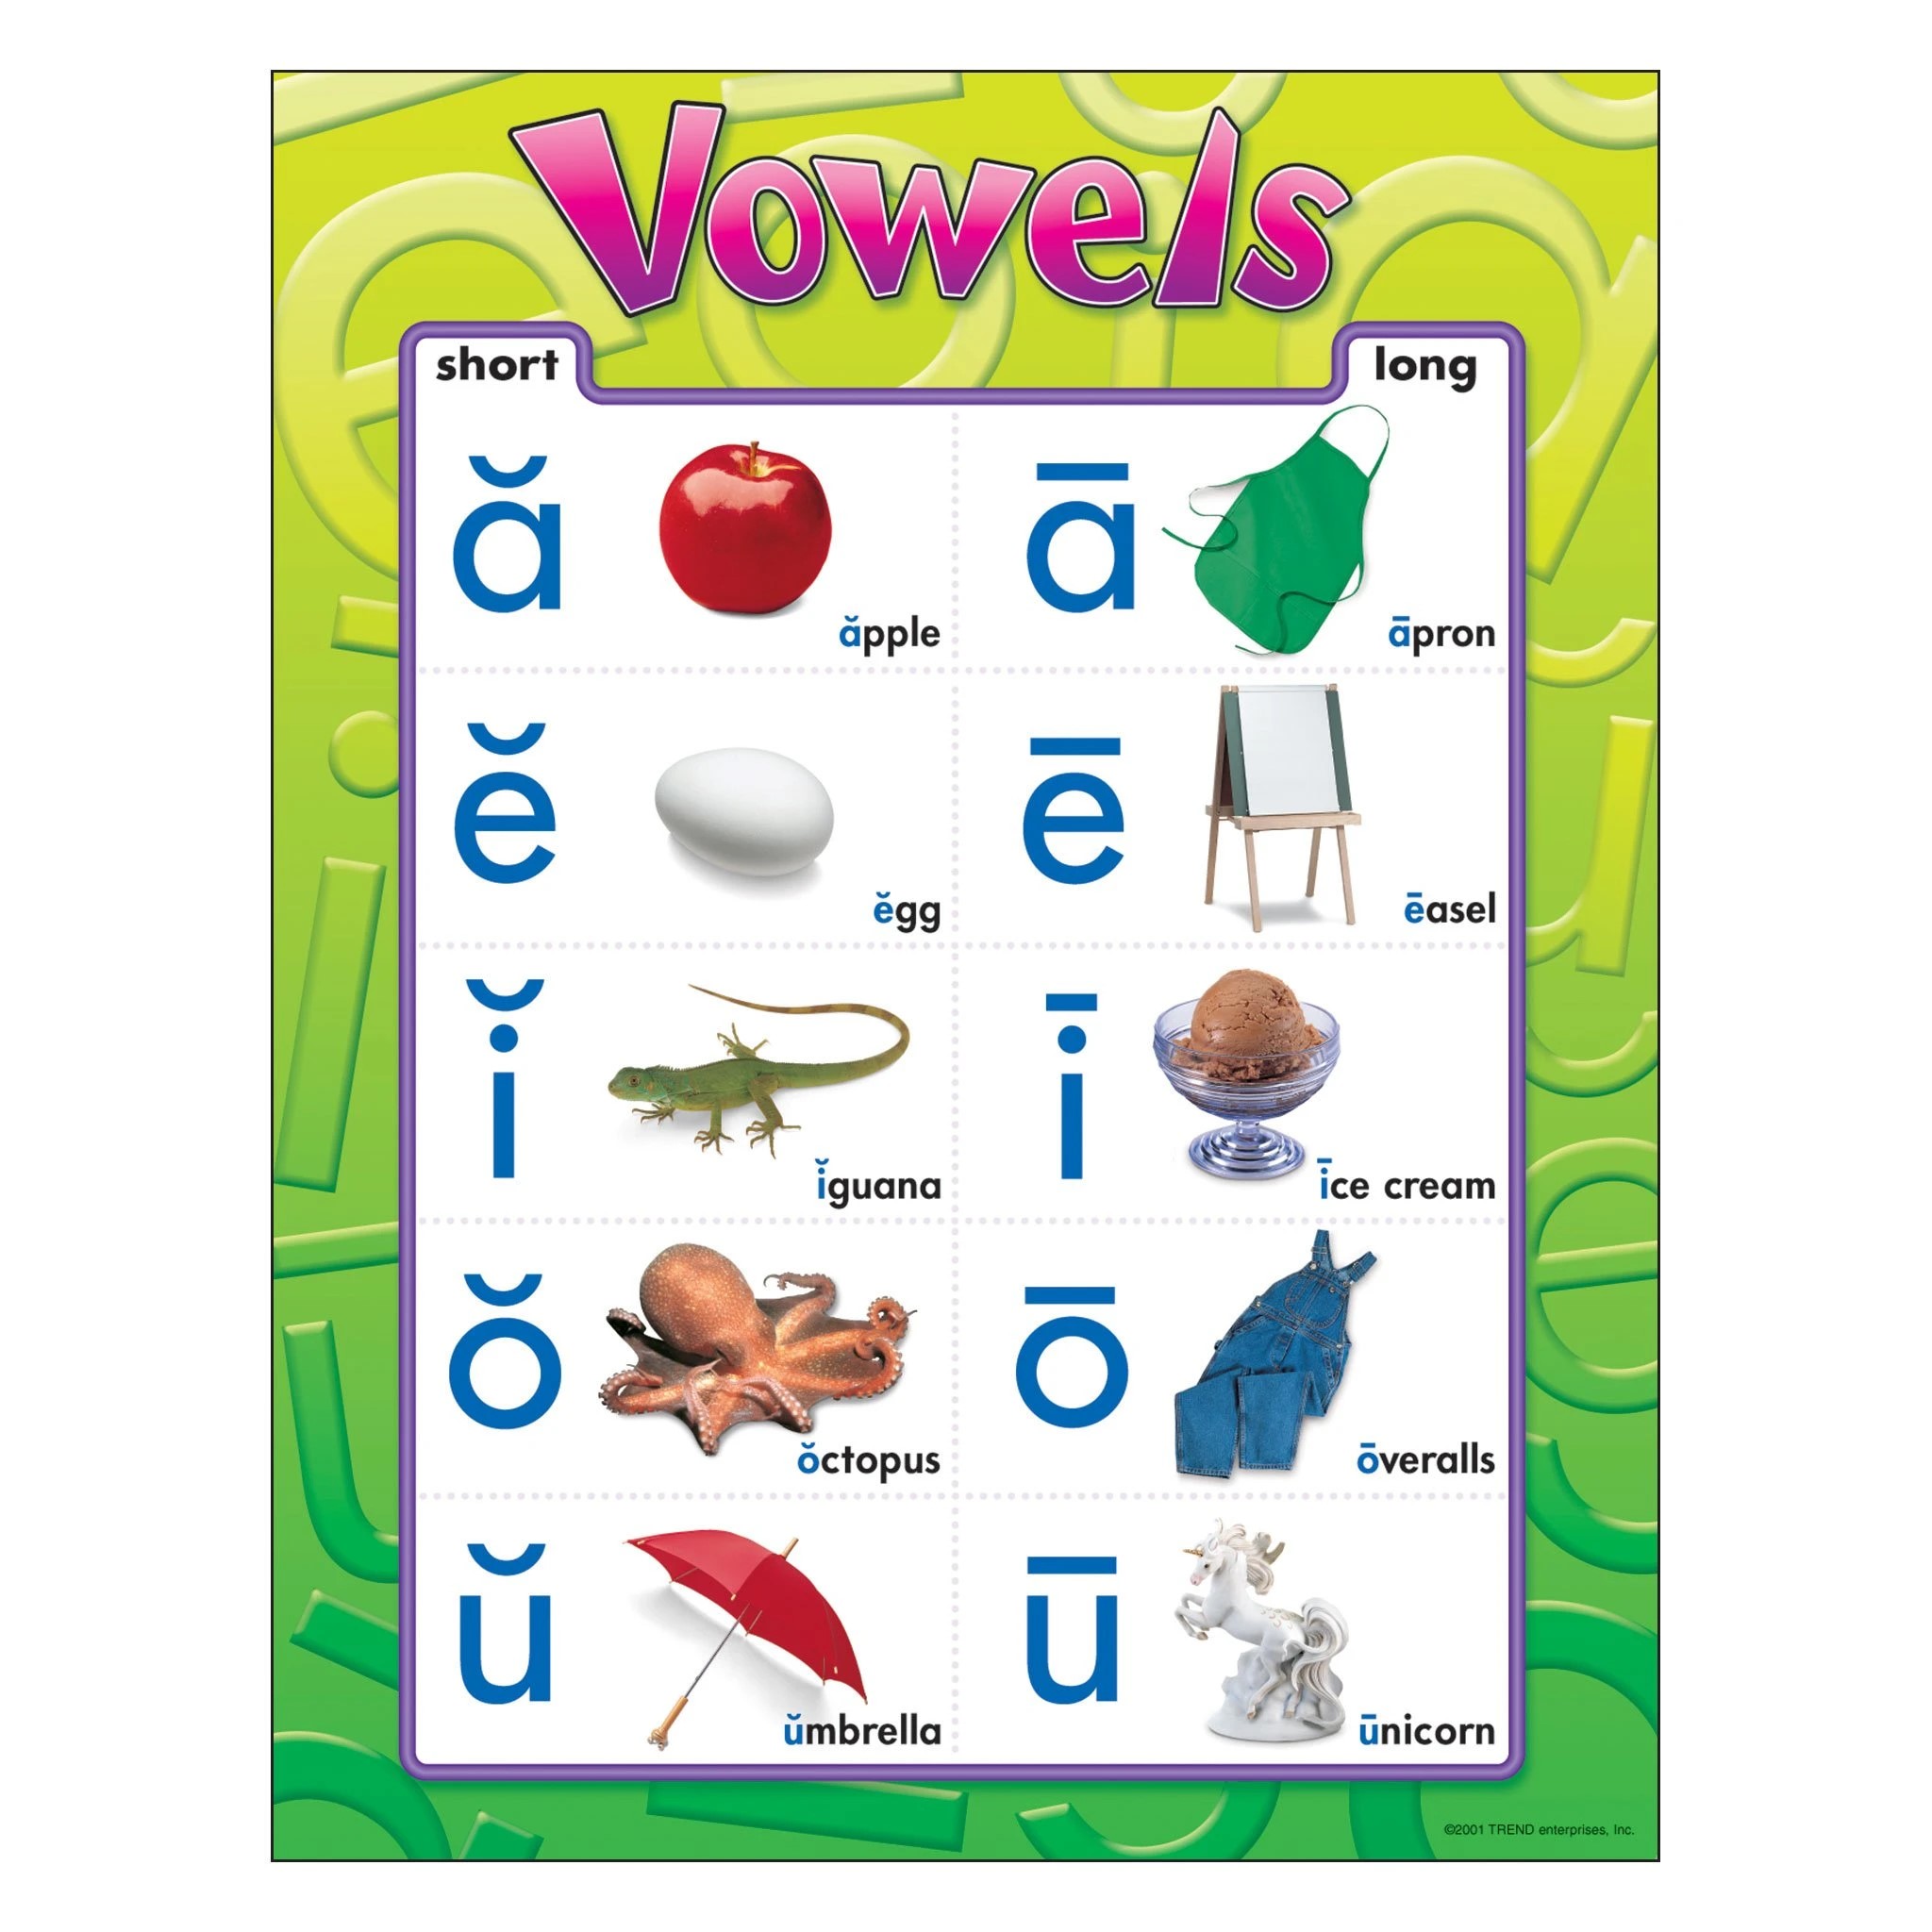 english-chart-t38032-vowels-learning-chart-17